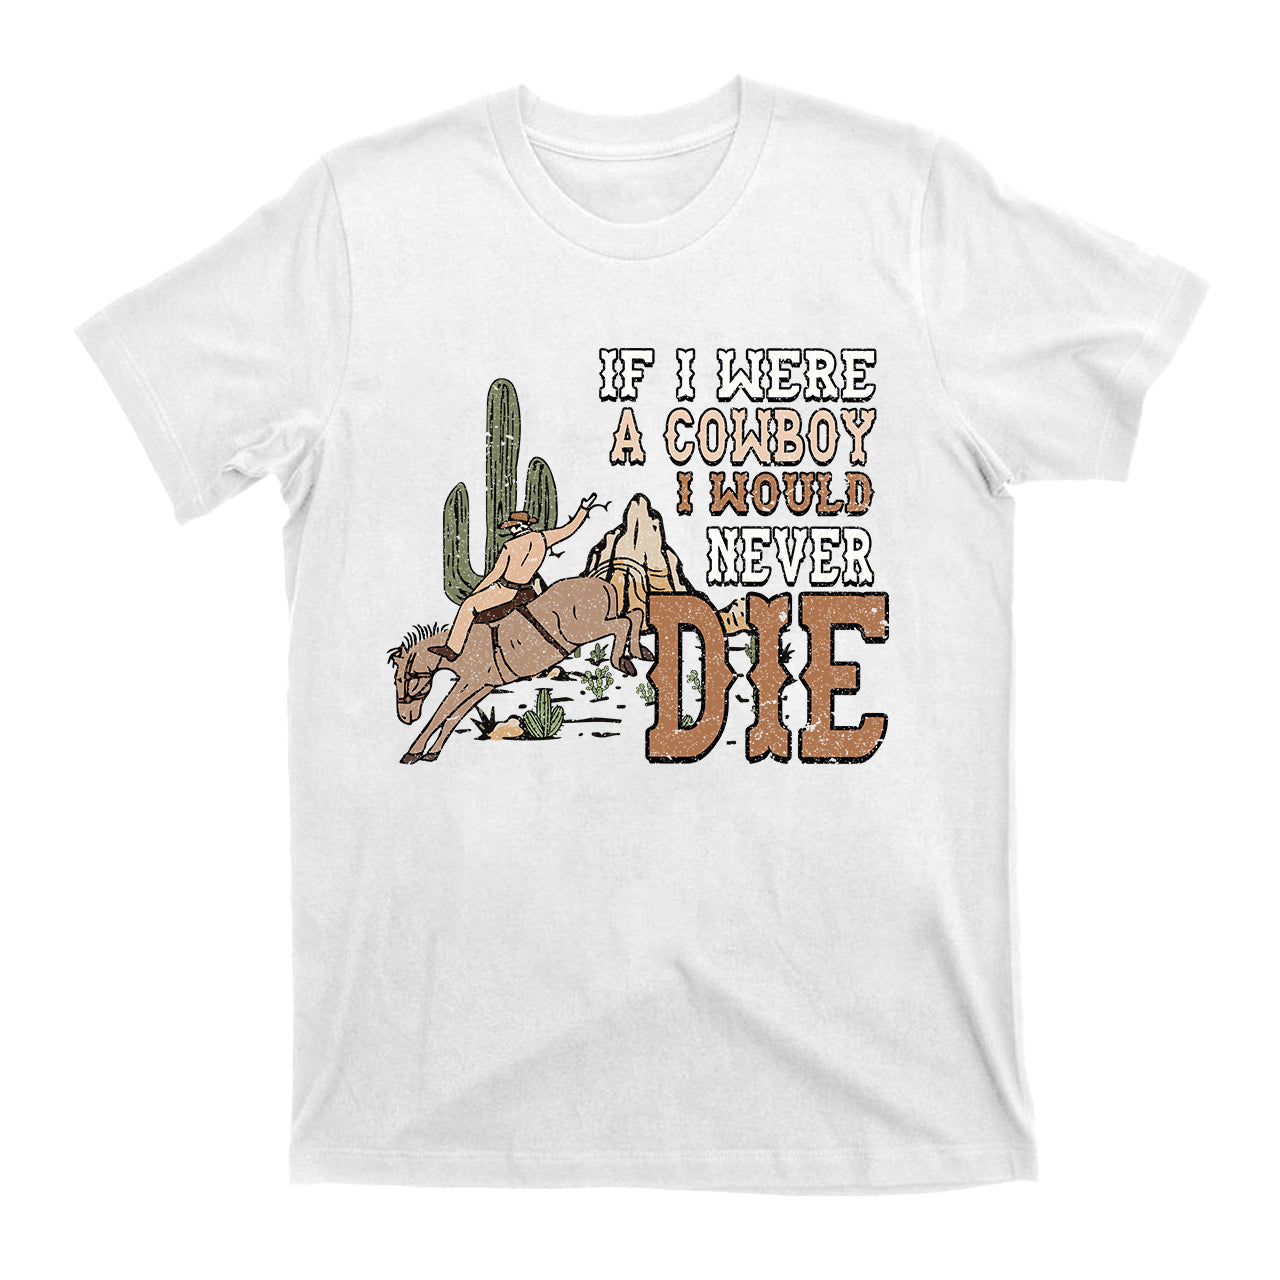 IF I Were A Cowboy I Would Never Die Vintage Cowboy T-Shirt